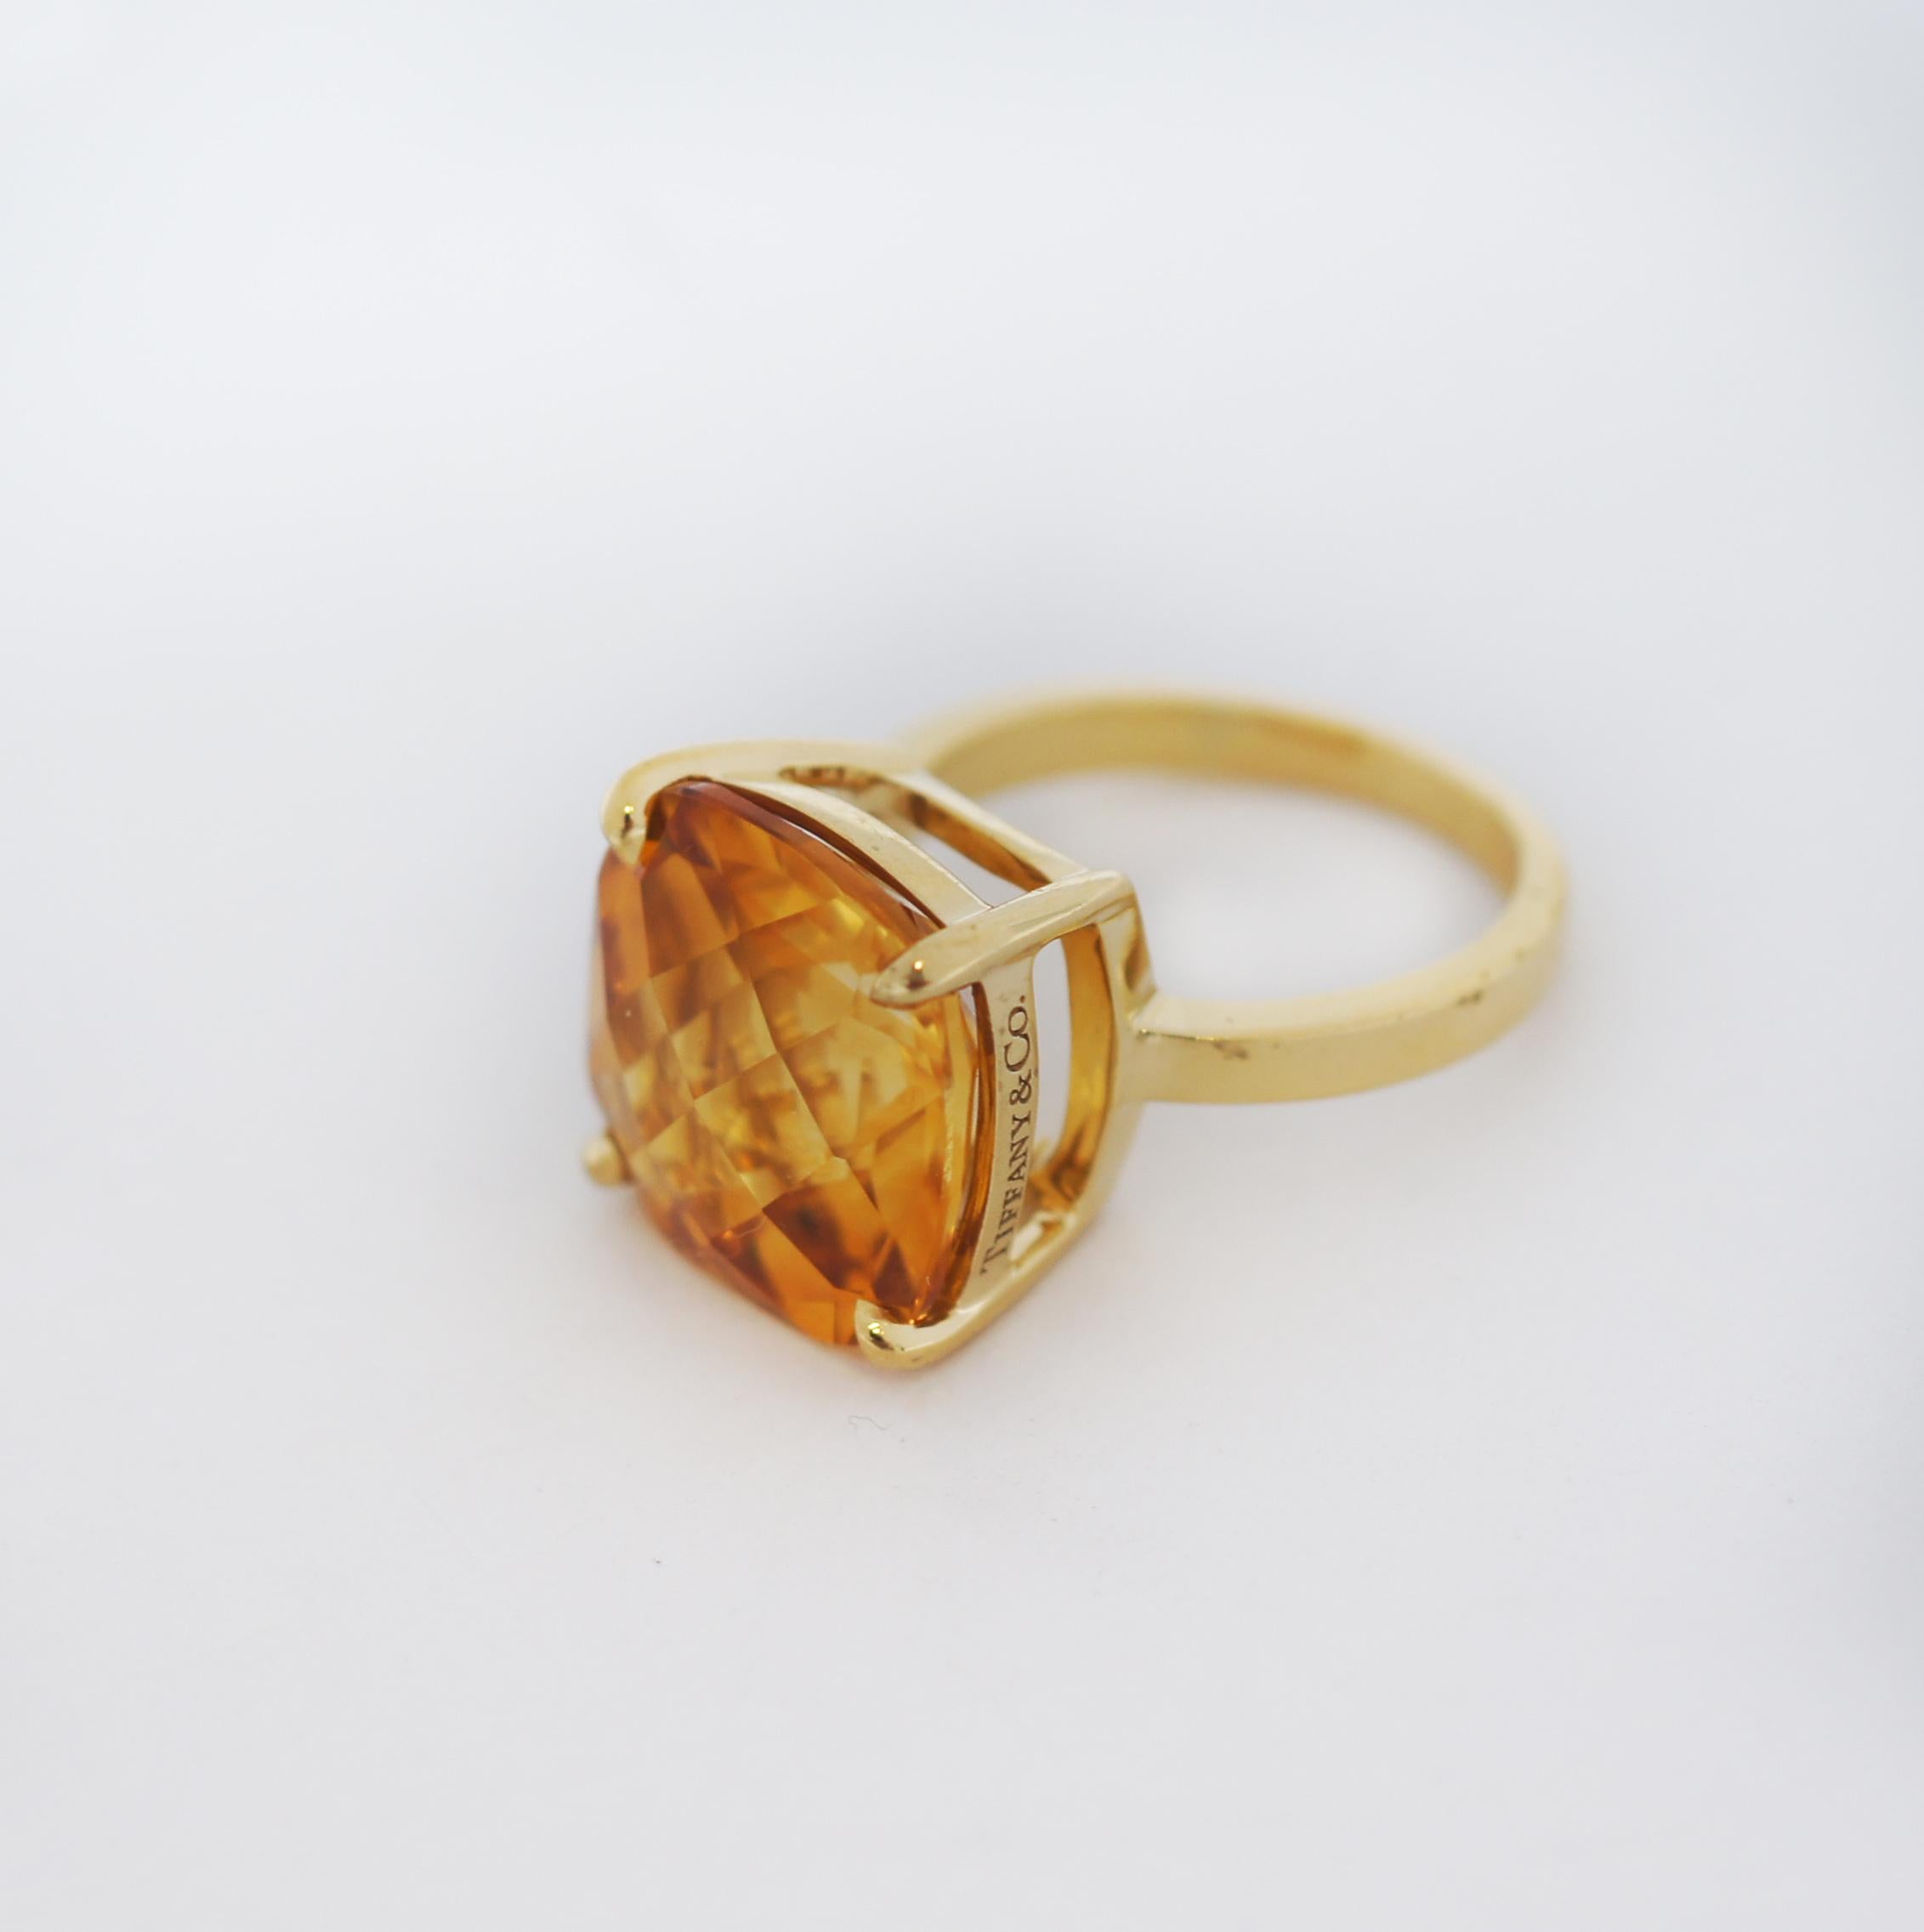 Tiffany & Co.
18K Yellow Gold
Citrine Gem
Sparklers Cocktail Ring
Approx. weight of 5.1 grams
15mm Citrine gem
Approximately 10mm high setting
Ring Size 6.5 (US)
In great looking condition
wear consistent with time and use
See images please
No